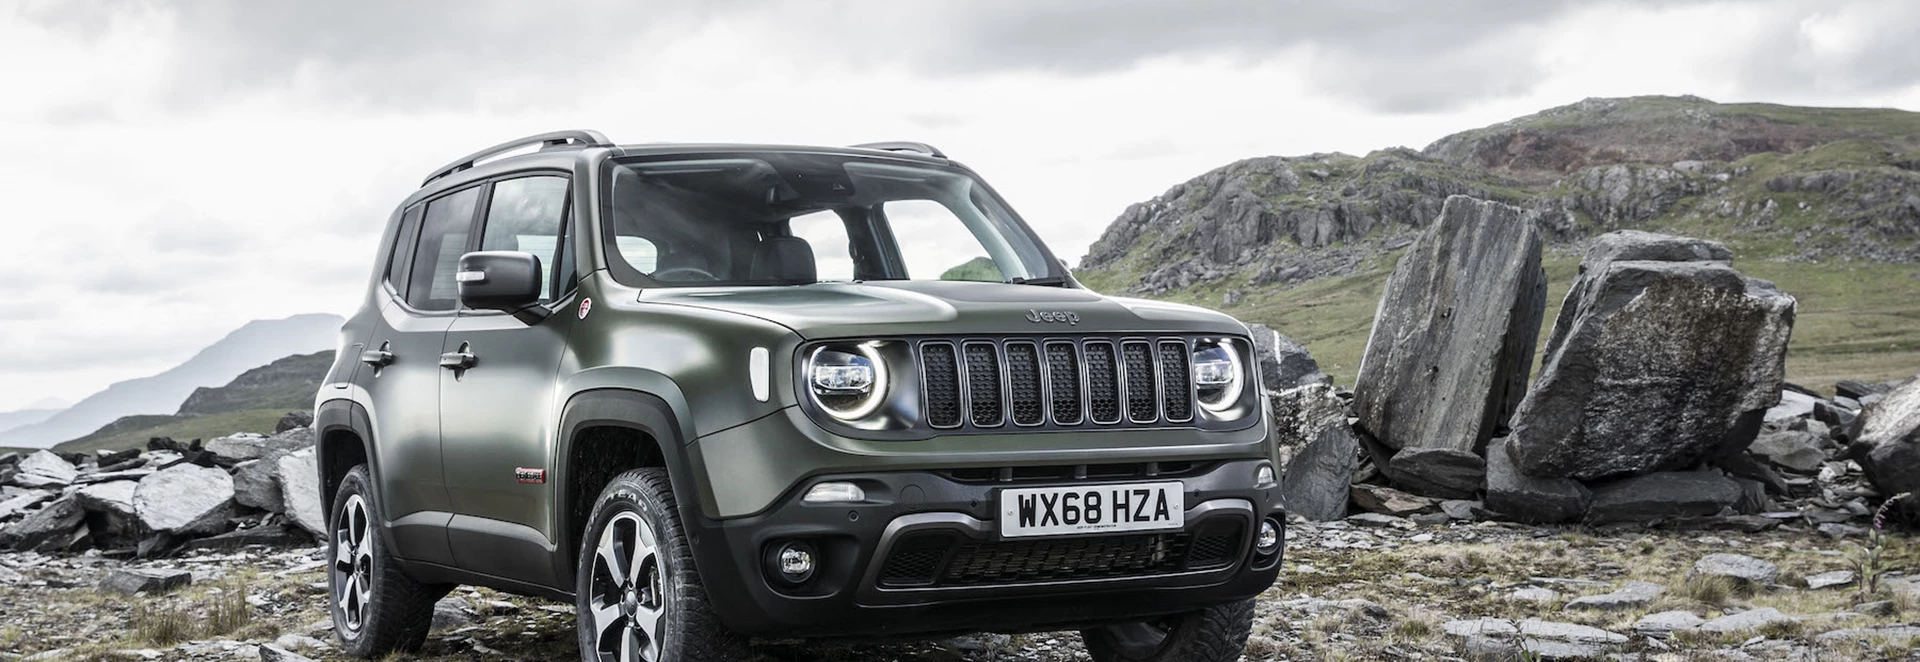 5 reasons why you should consider a Jeep for your next car 